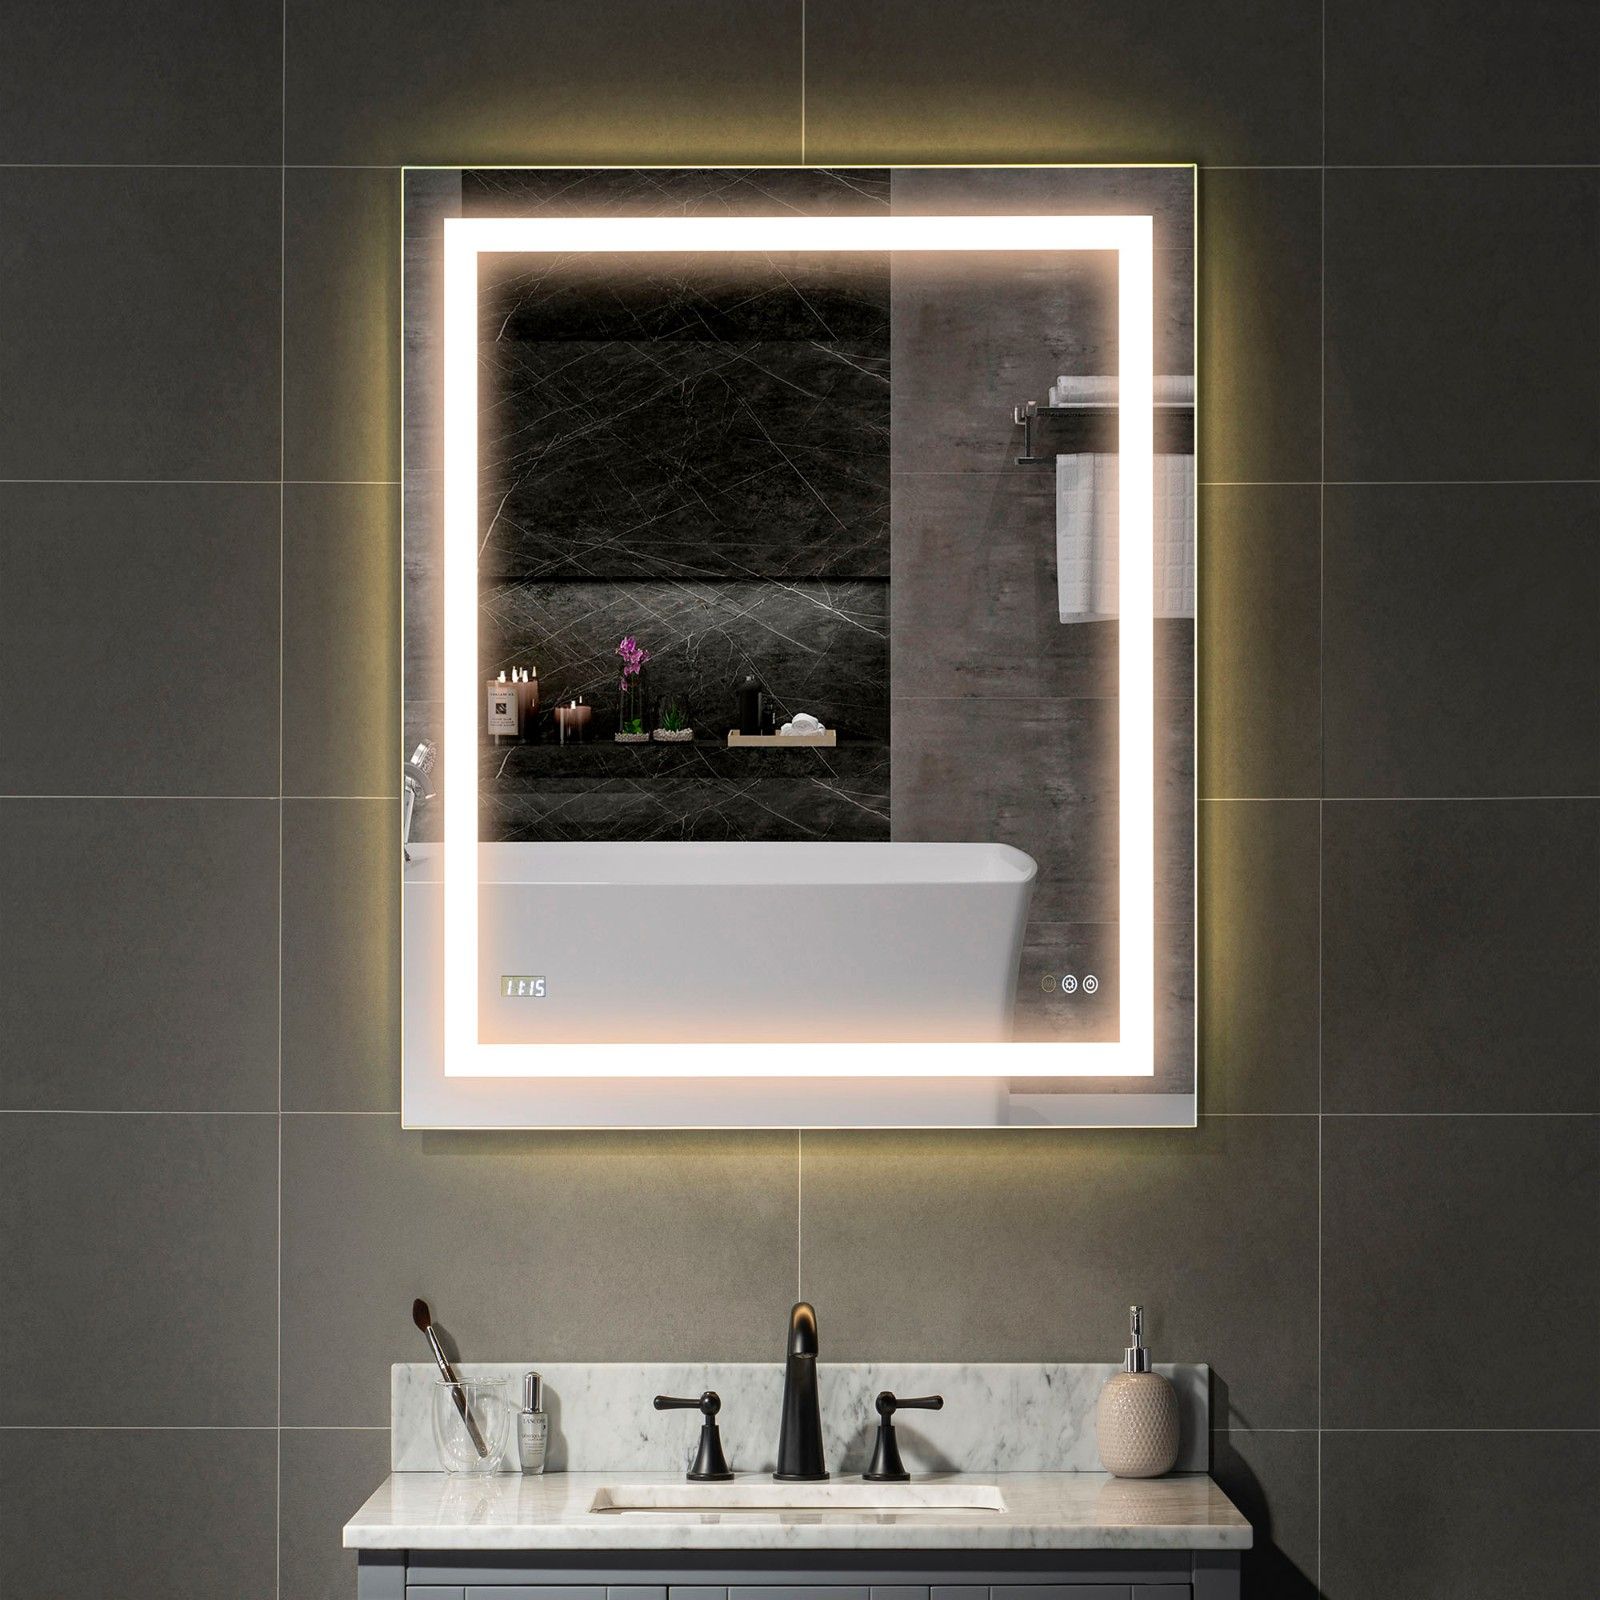 ᐅ【woodbridge 20"x28" Led Dimmable Bathroom Mirror Led Lighted Wall Regarding Matte Black Octagon Led Wall Mirrors (View 6 of 15)